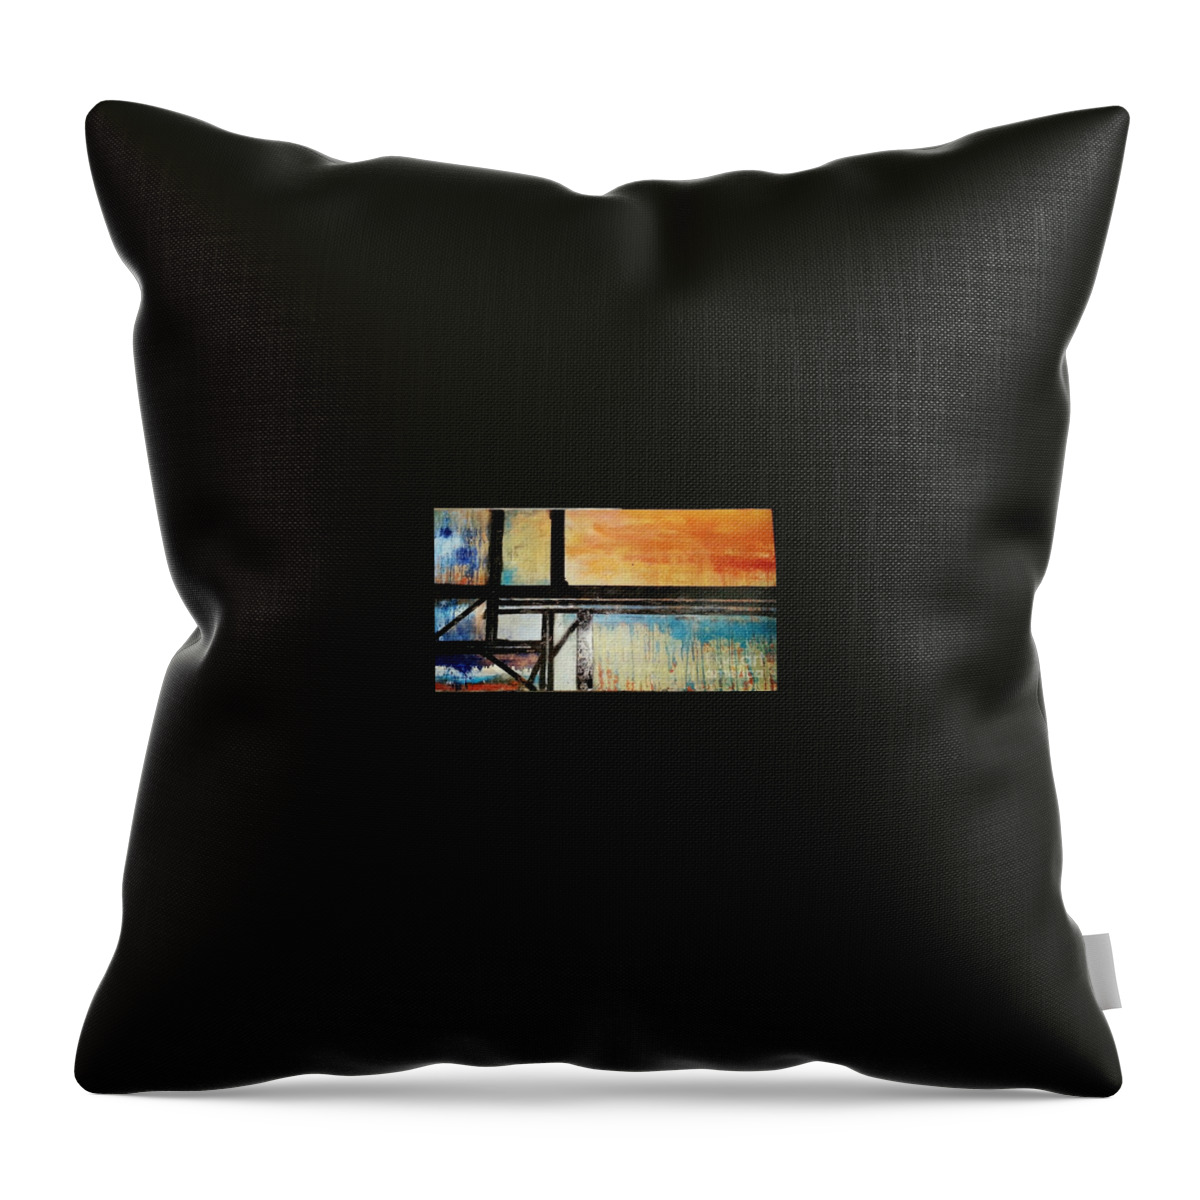  Throw Pillow featuring the painting Dawn Patrol by Milisa Miner